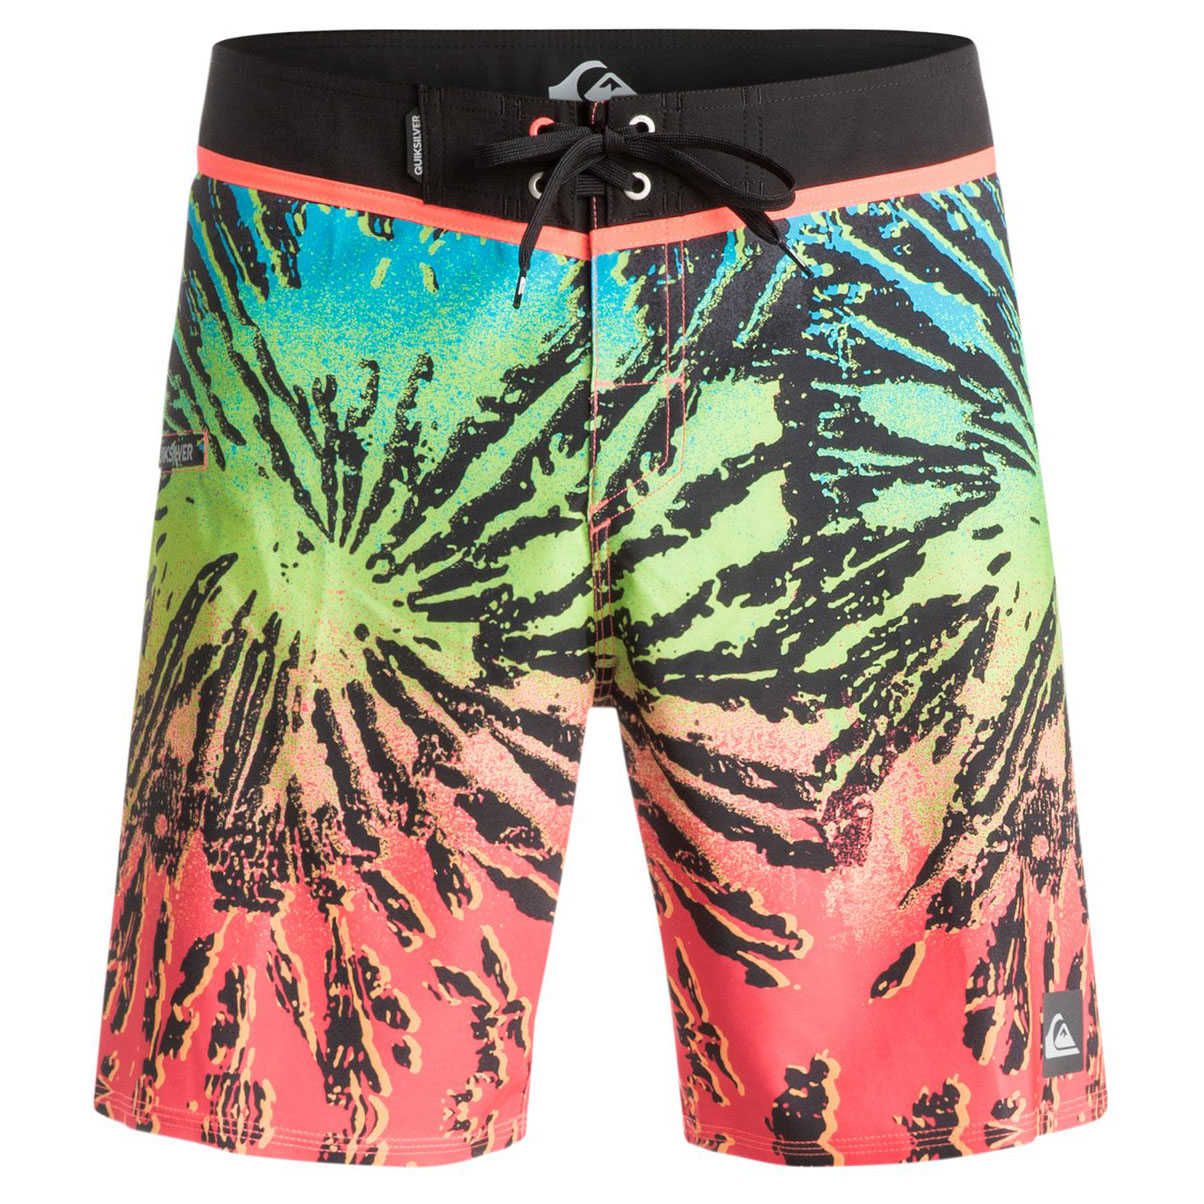 Boardshort - Glitched 18" - Glitched Fiery Coral